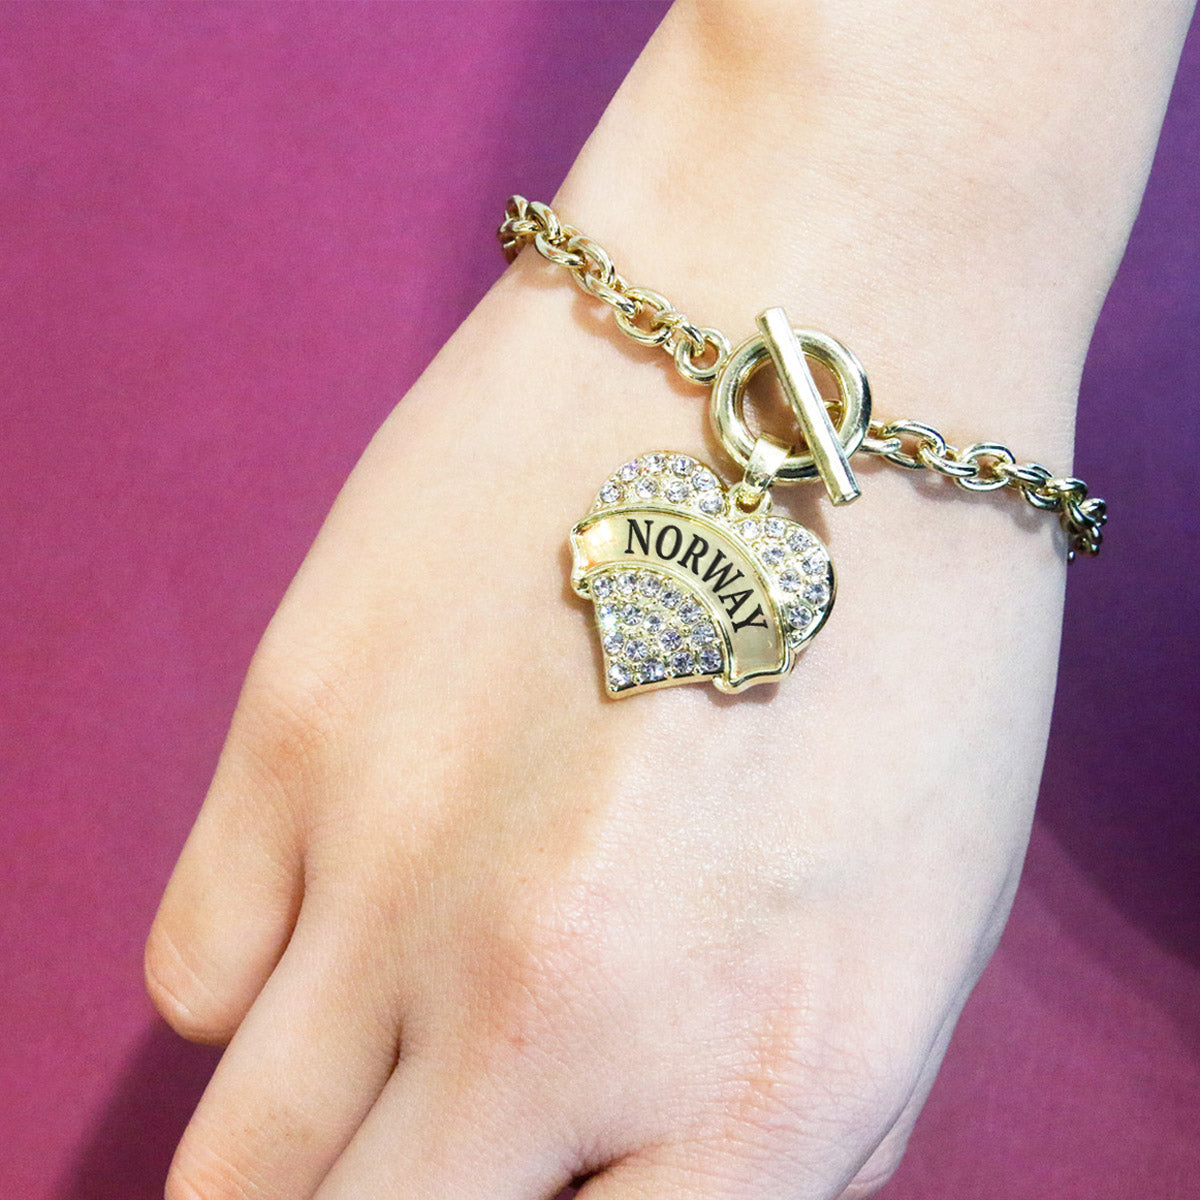 Gold Norway Pave Heart Charm Toggle Bracelet